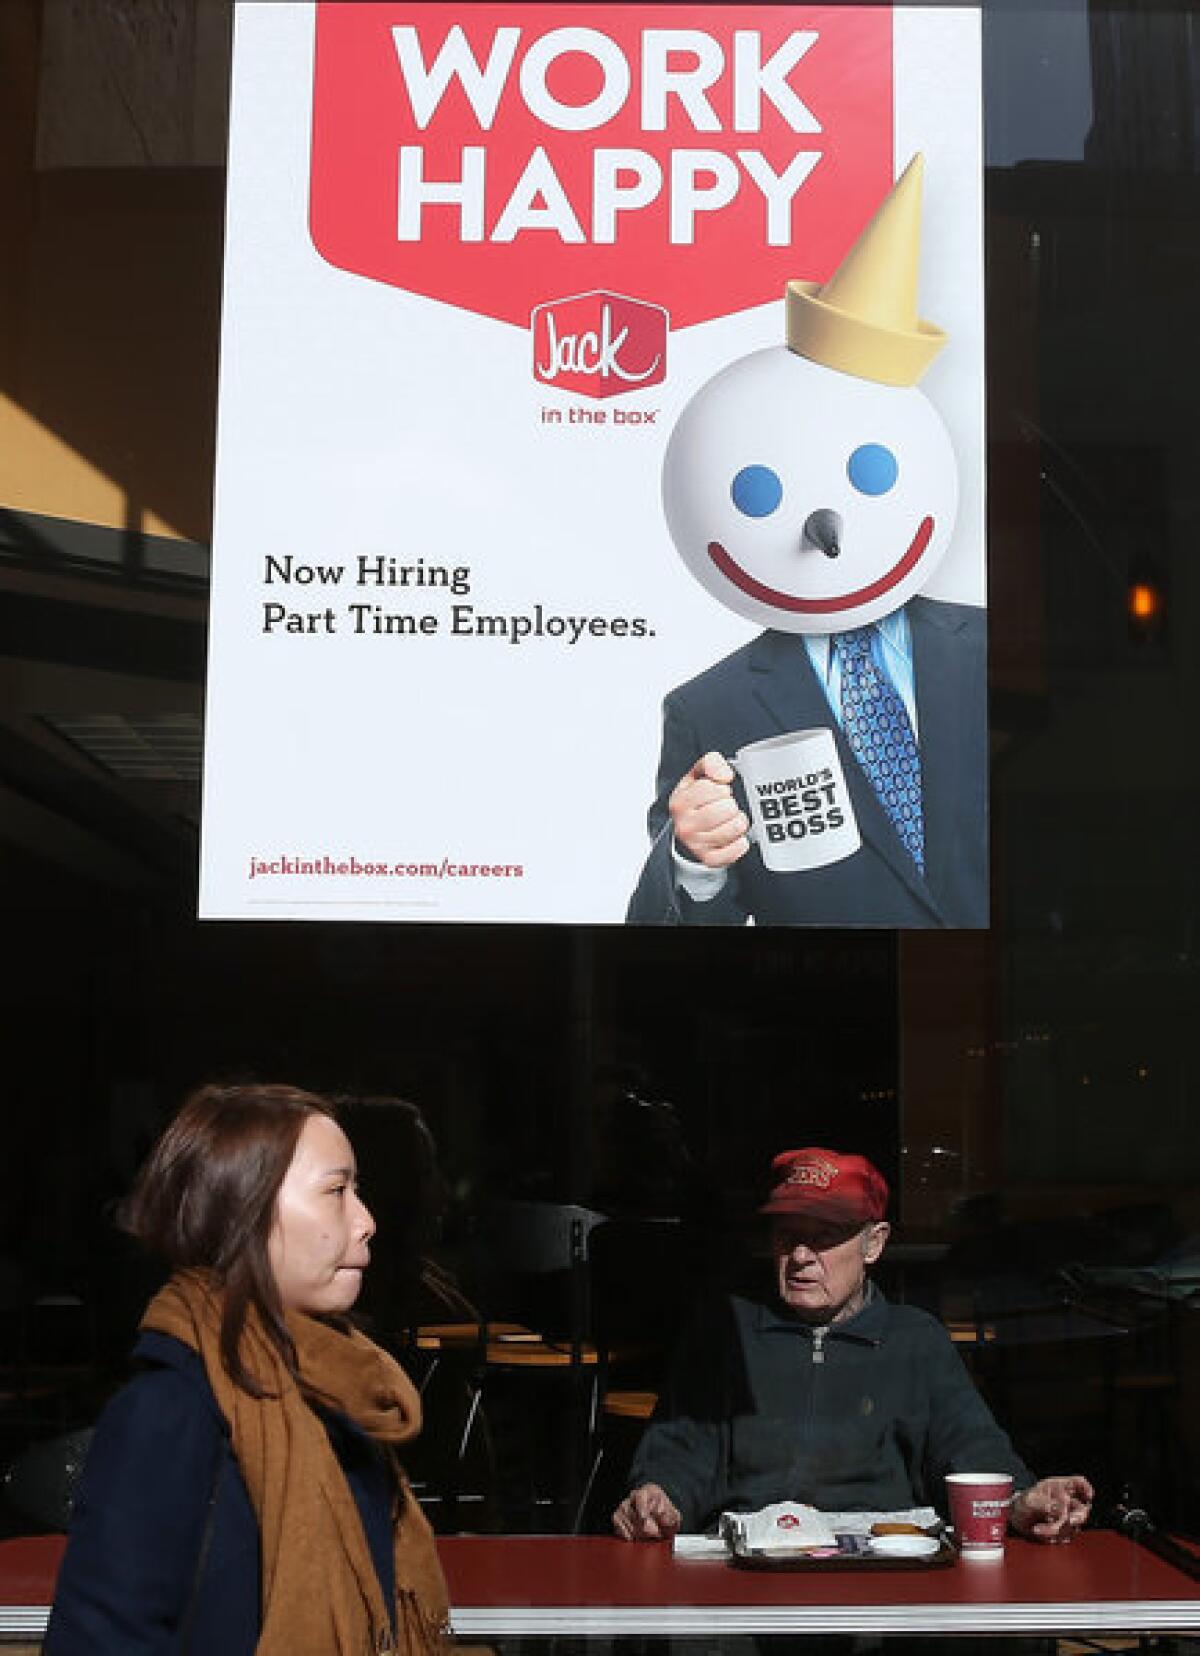 A sign advertising jobs in the window of a Jack in the Box restaurant in San Francisco.